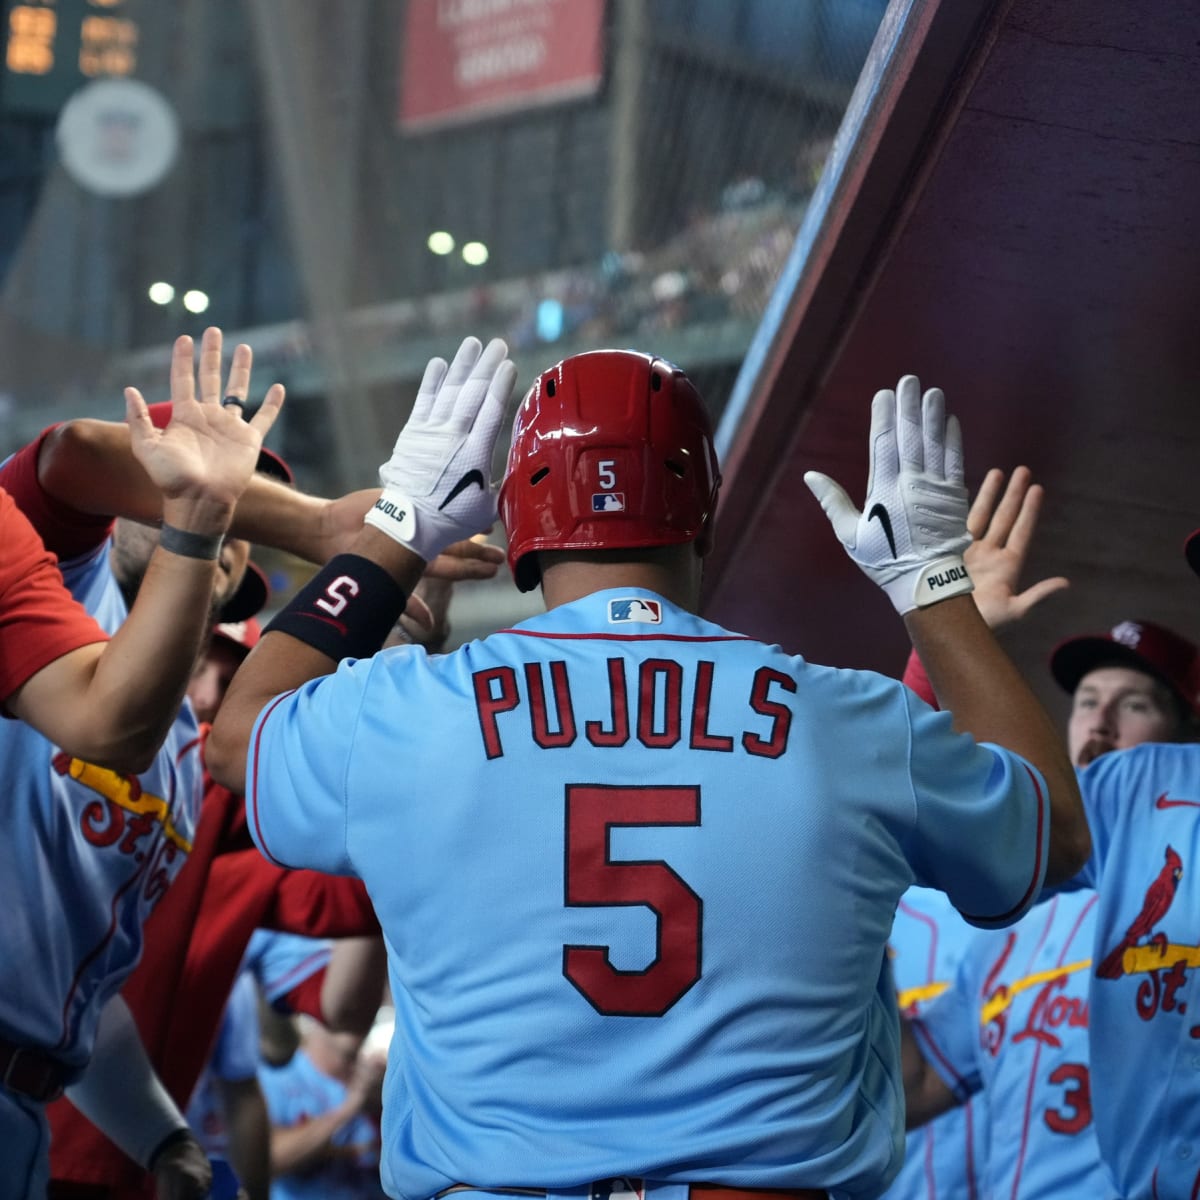 Albert Pujols tracker, how to watch: Chase to 700 career home runs - How to  Watch and Stream Major League & College Sports - Sports Illustrated.